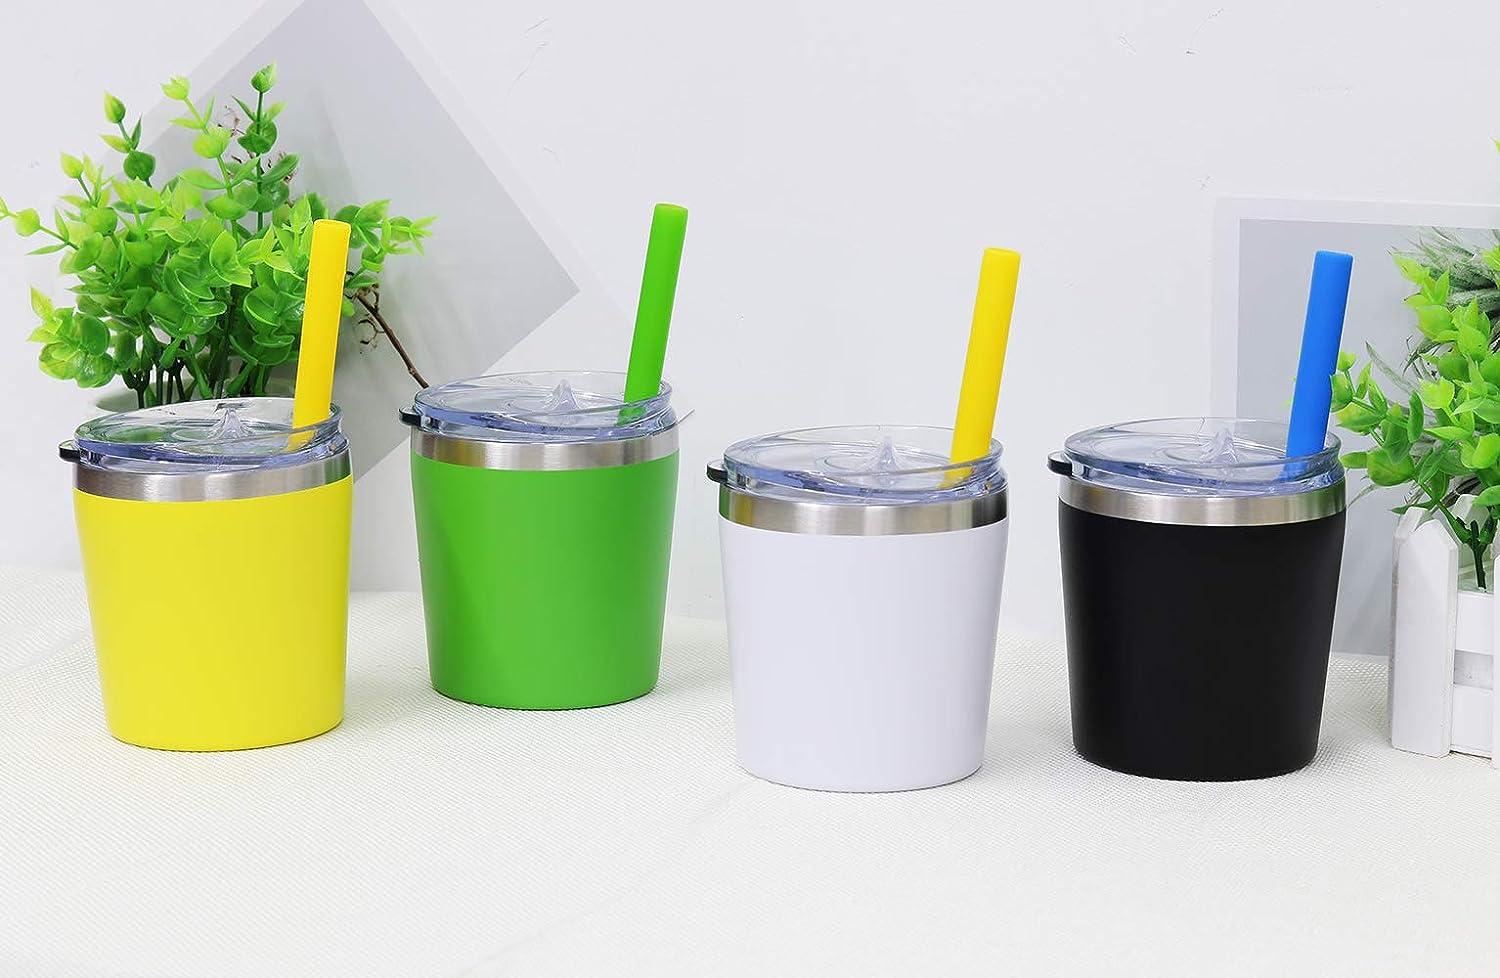 Cute Kids and Toddler Tumbler Cup with Lid and Straw, Set of 2